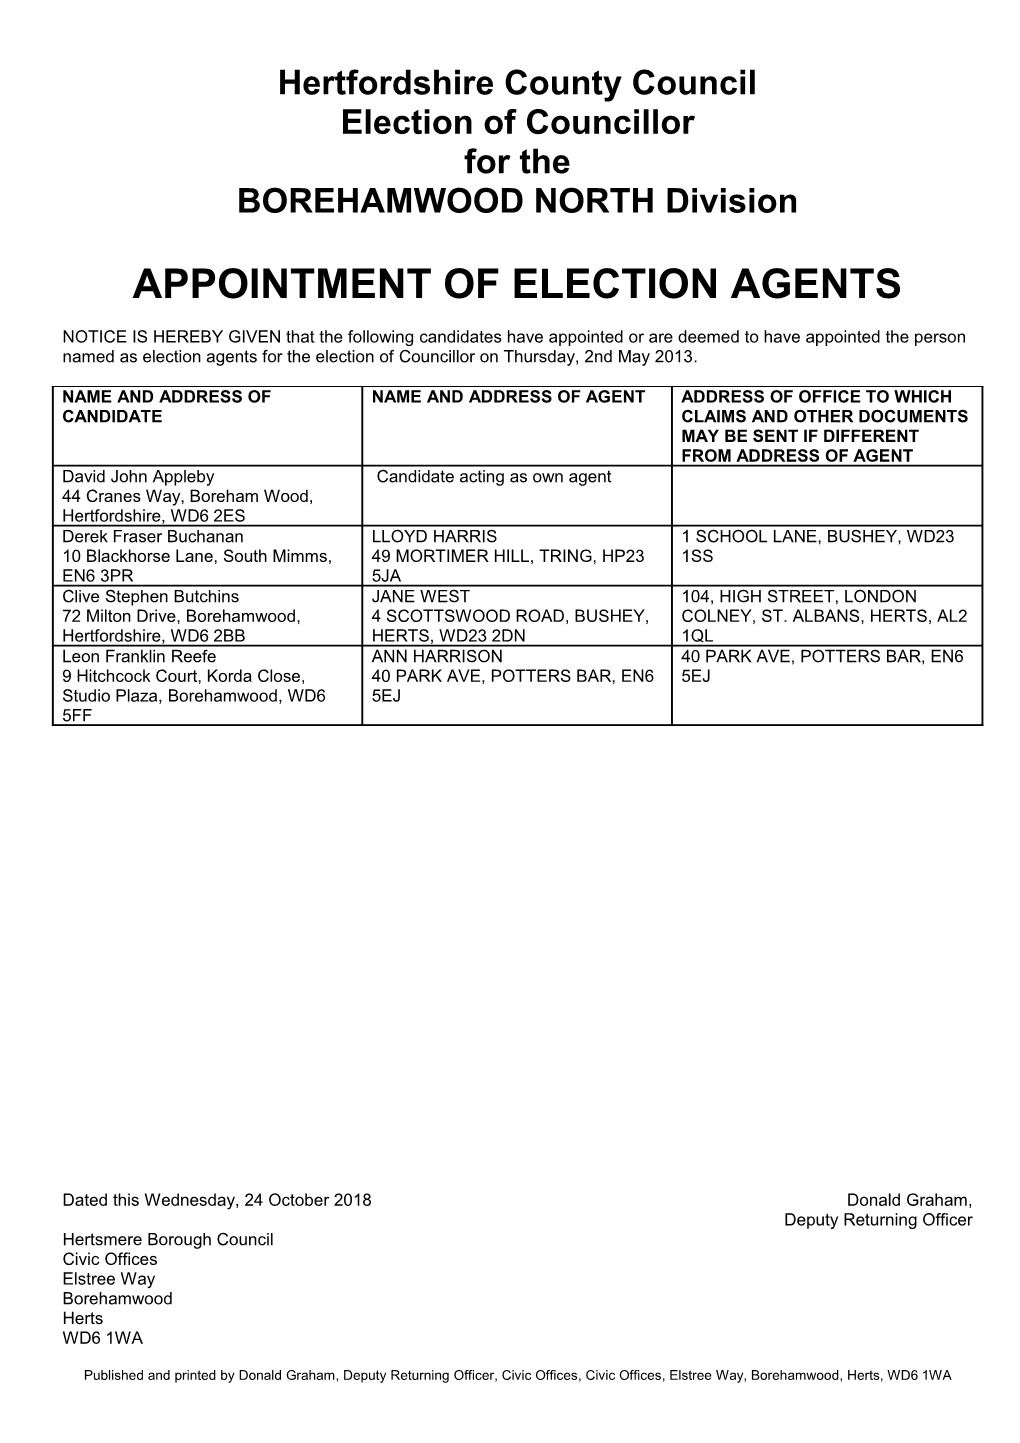 Notice of Elections Agents County